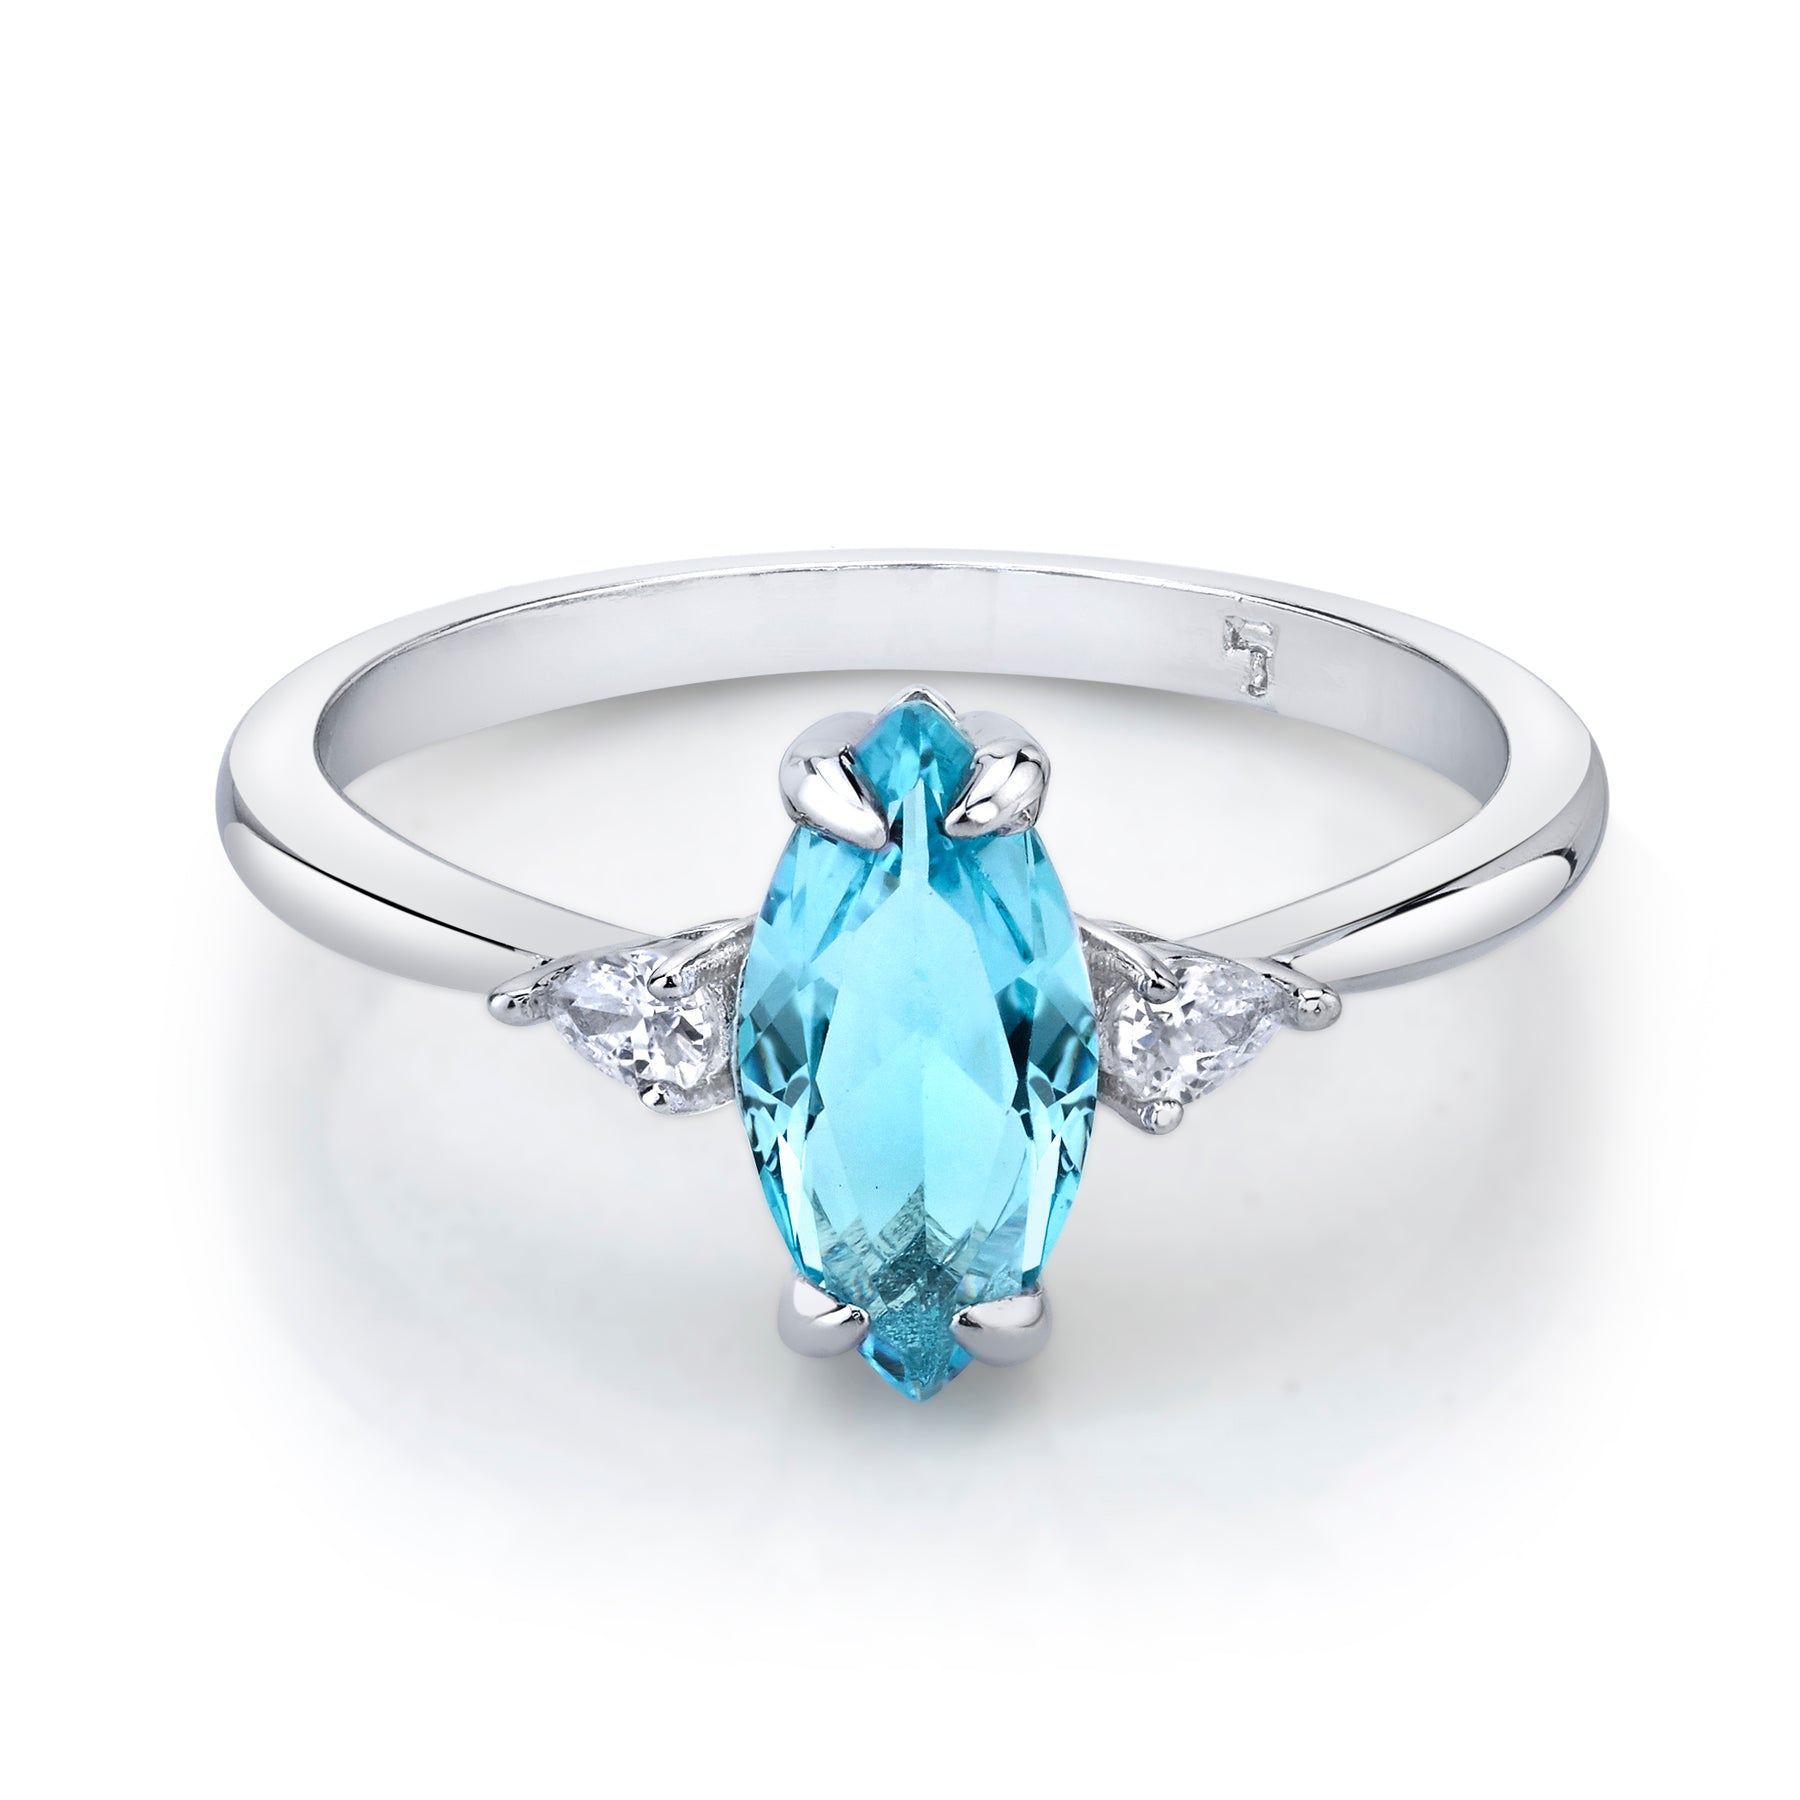 Aquamarine - March Birthstone Collection - Jewel Candle